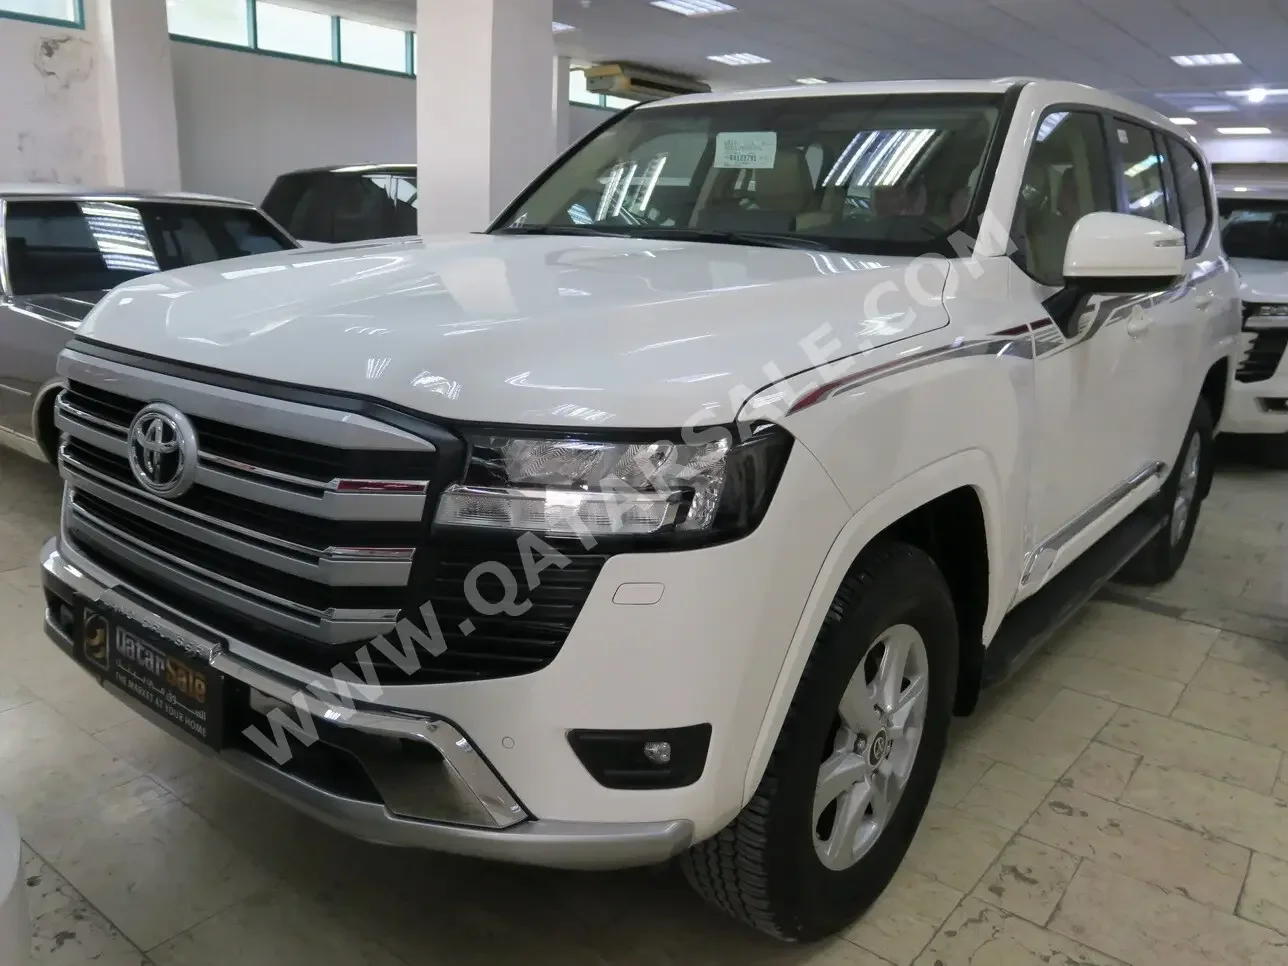 Toyota  Land Cruiser  GXR Twin Turbo  2024  Automatic  3,000 Km  6 Cylinder  Four Wheel Drive (4WD)  SUV  White  With Warranty